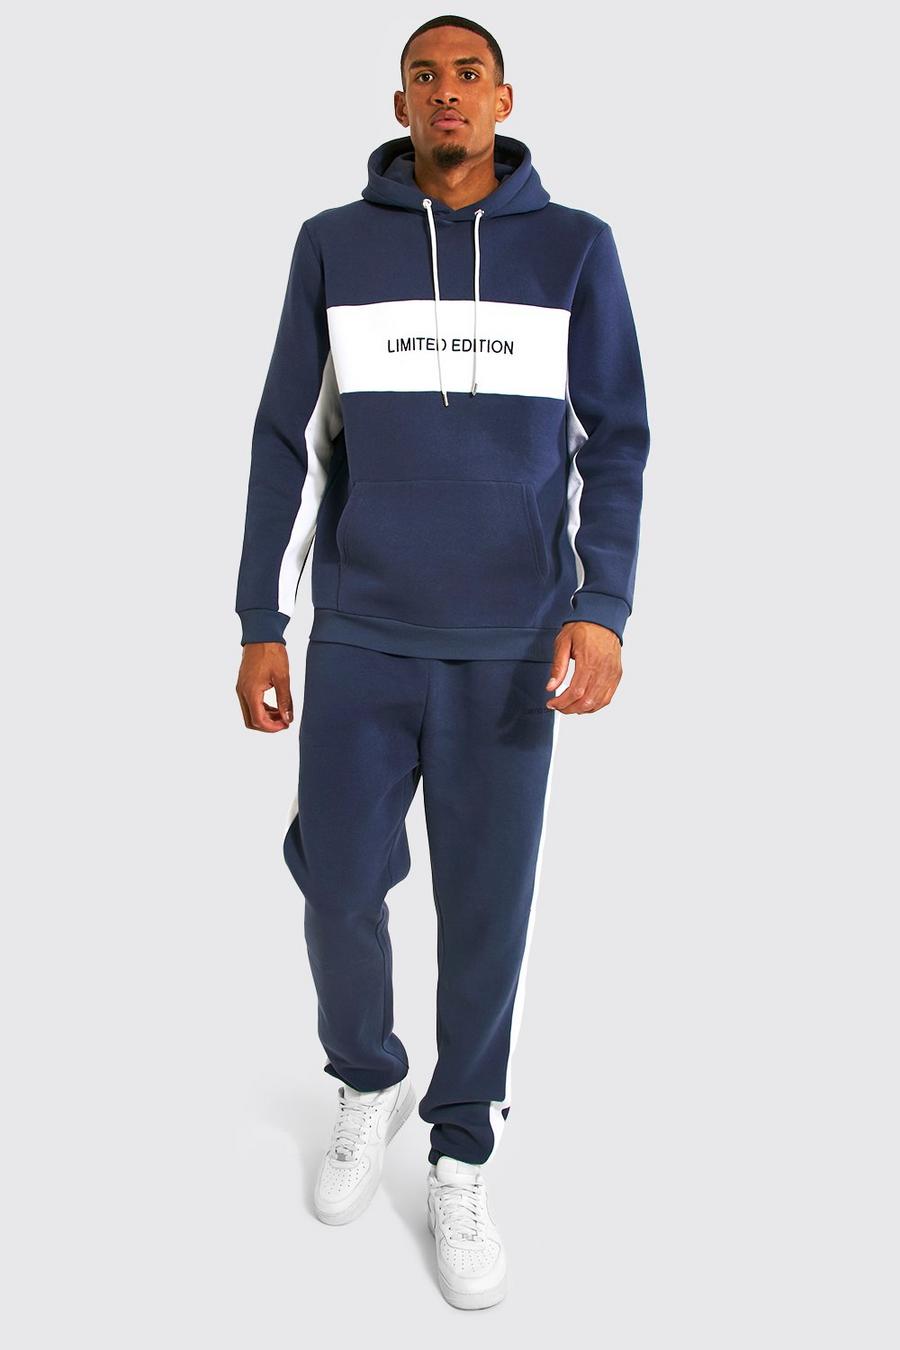 Navy azul marino Tall Limited Edition Colour Block Hooded Tracksuit